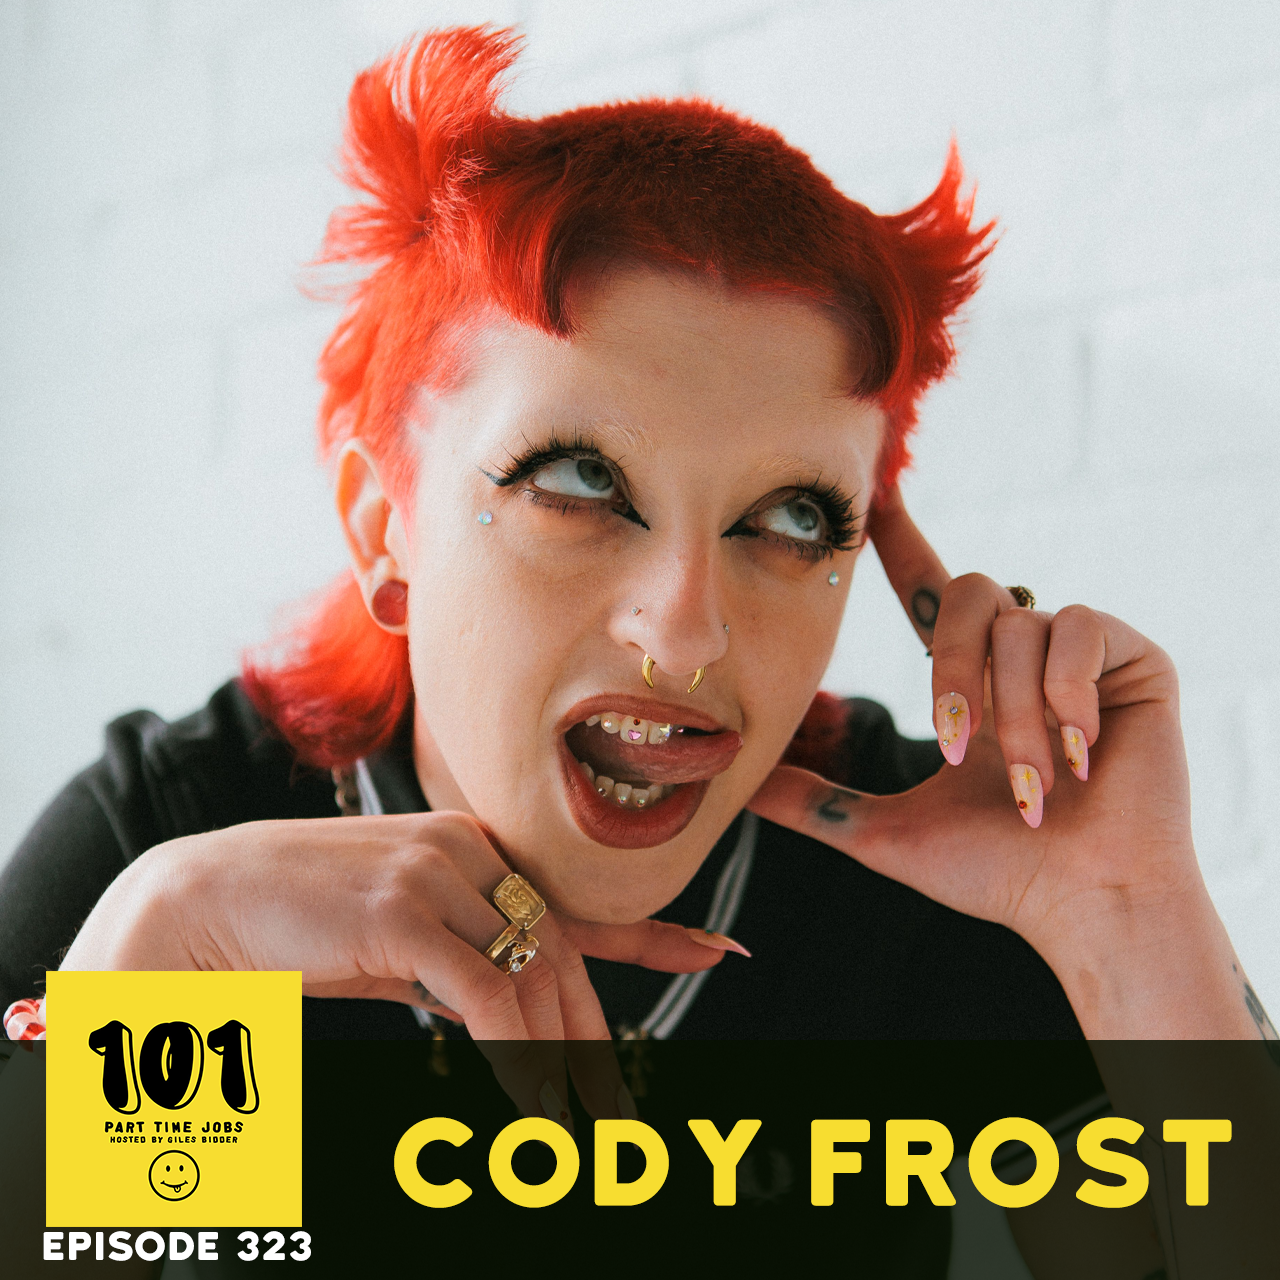 Episode Cody Frost - "I hope it was all worth it"